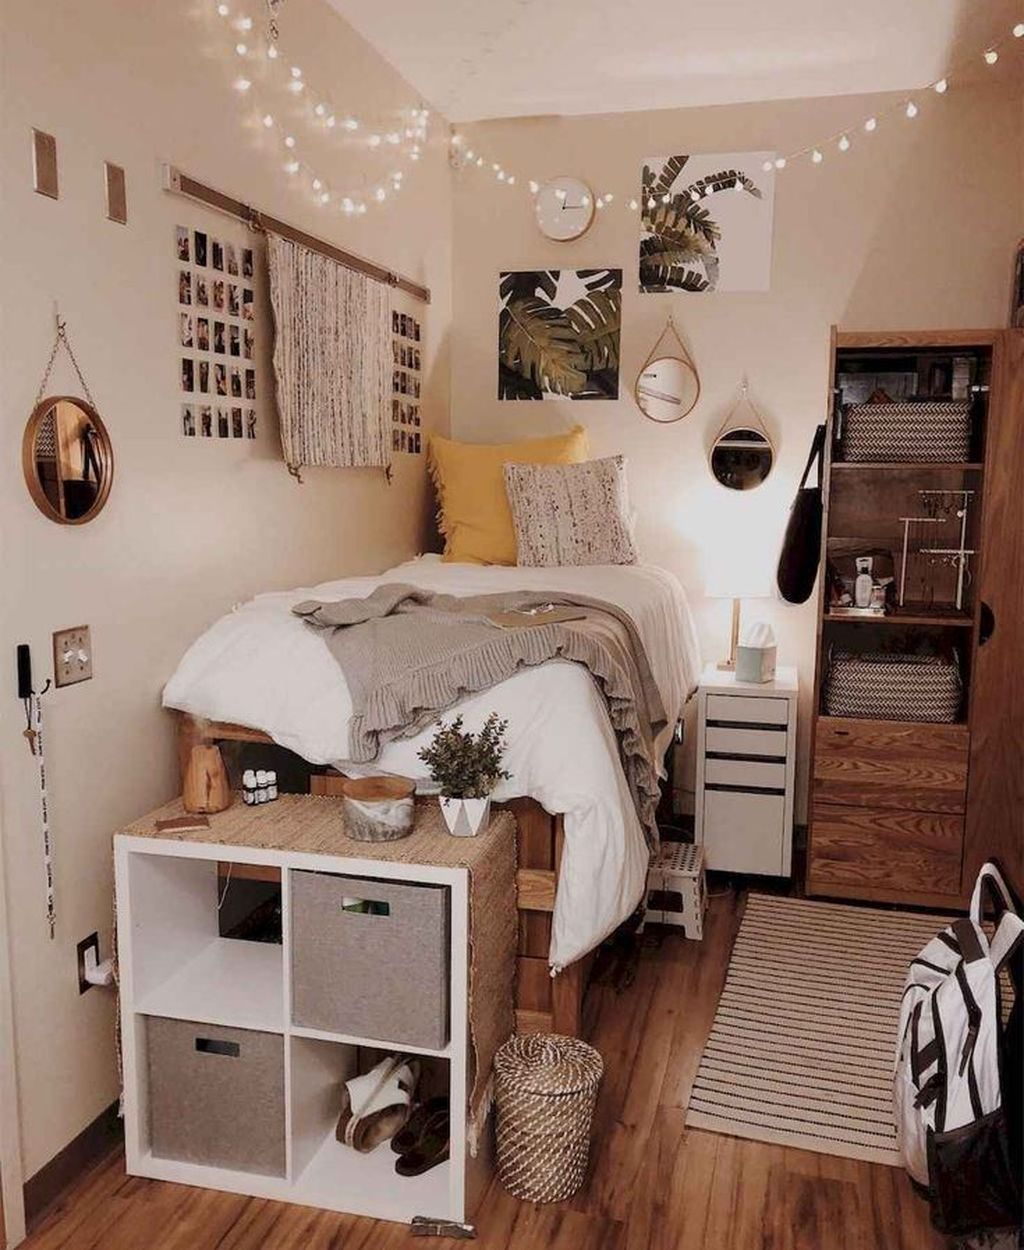 32 The Best DIY Bedroom Decor Ideas You Have To Try - The Best DIY BeDroom Decor IDeas You Have To Try 27